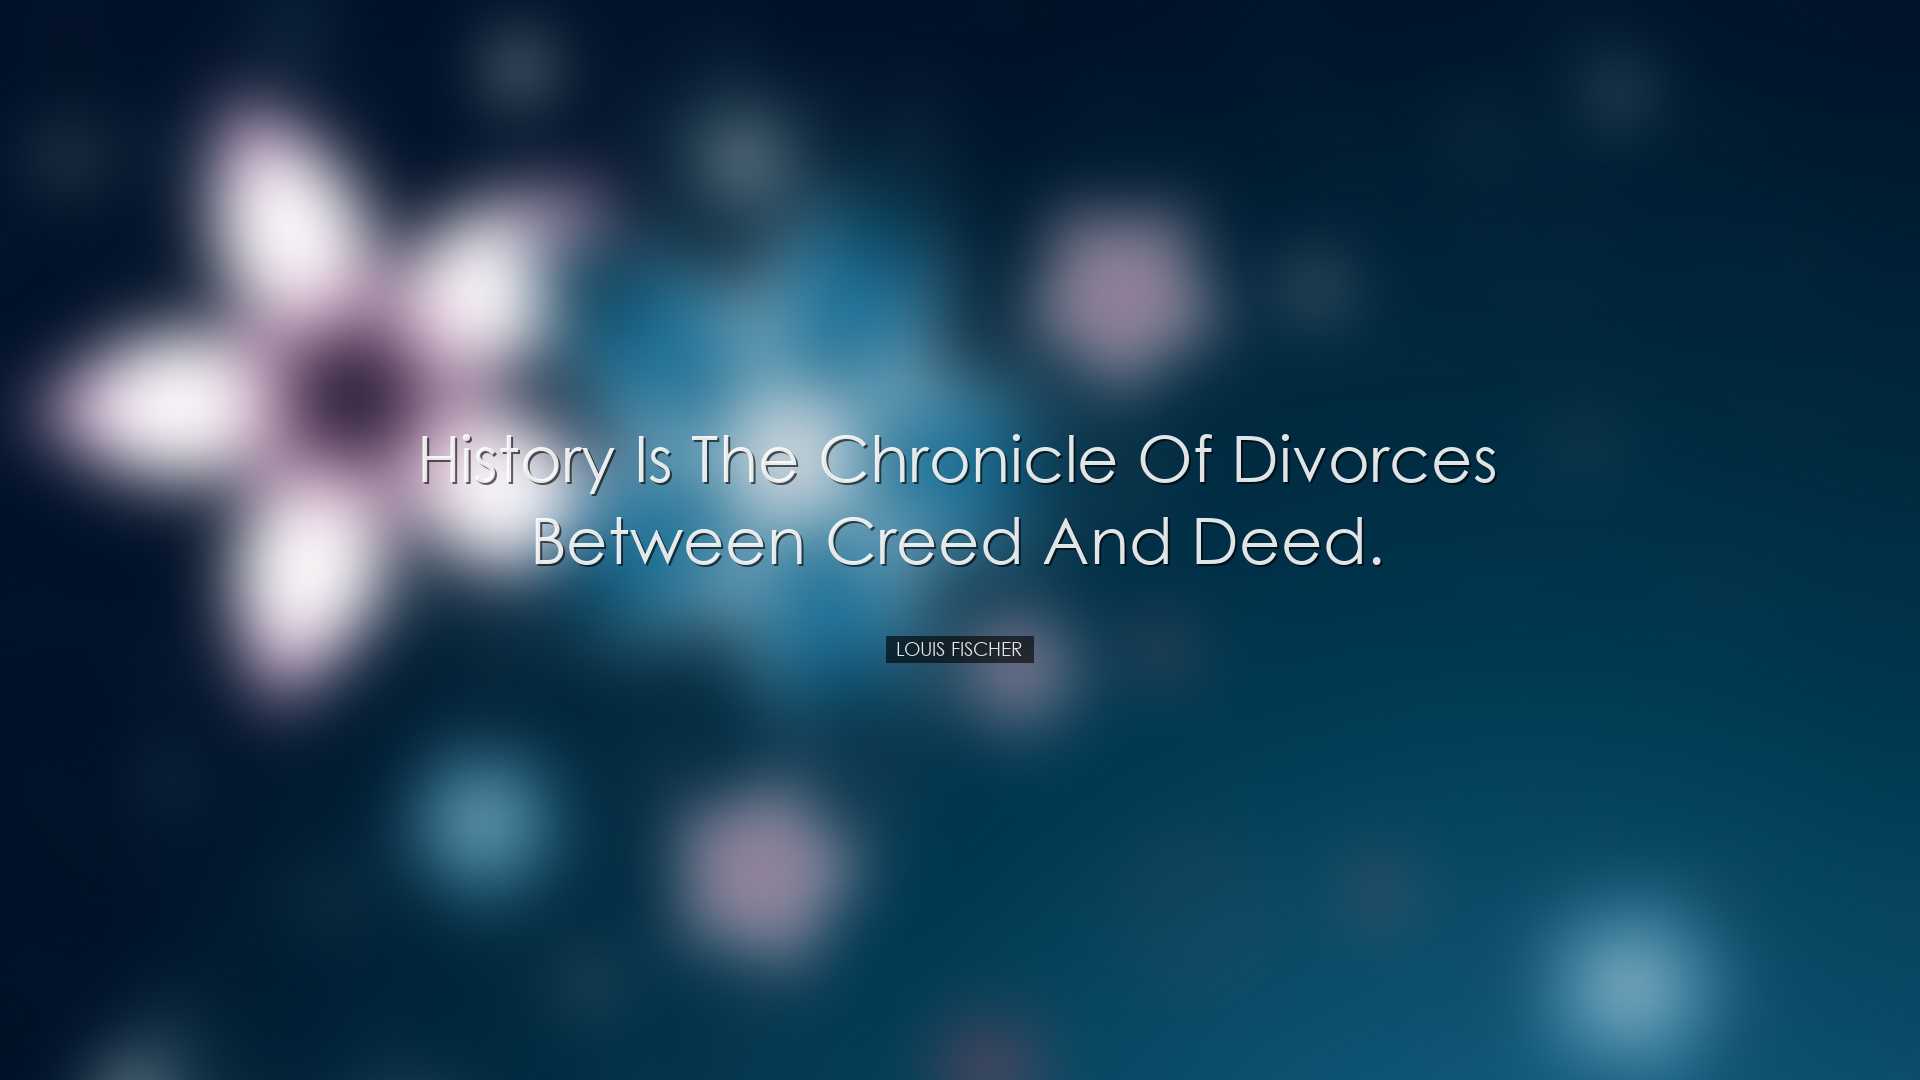 History is the chronicle of divorces between creed and deed. - Lou